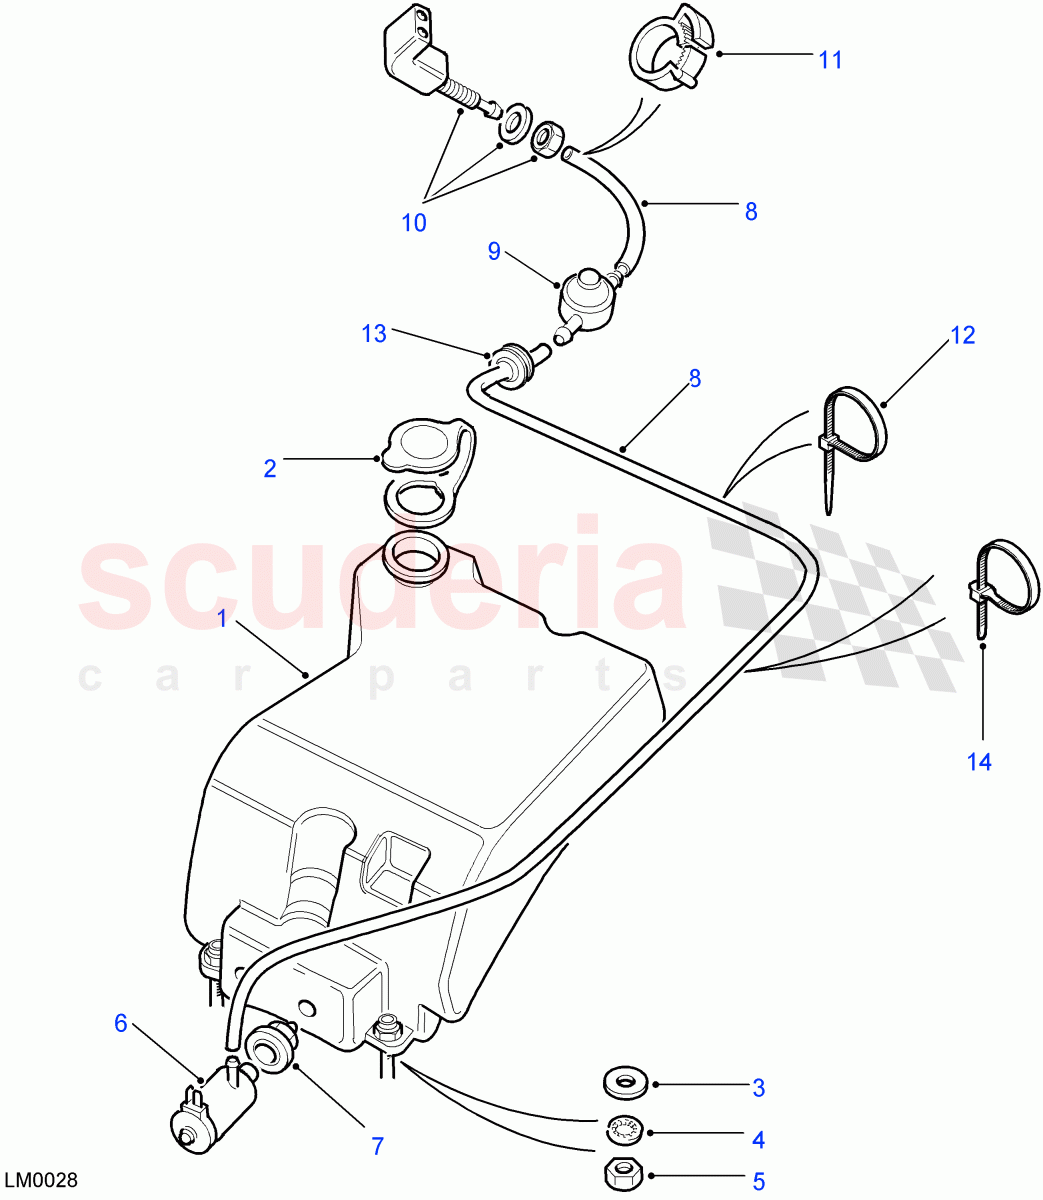 Windscreen Washer((V)FROM7A000001) of Land Rover Land Rover Defender (2007-2016)